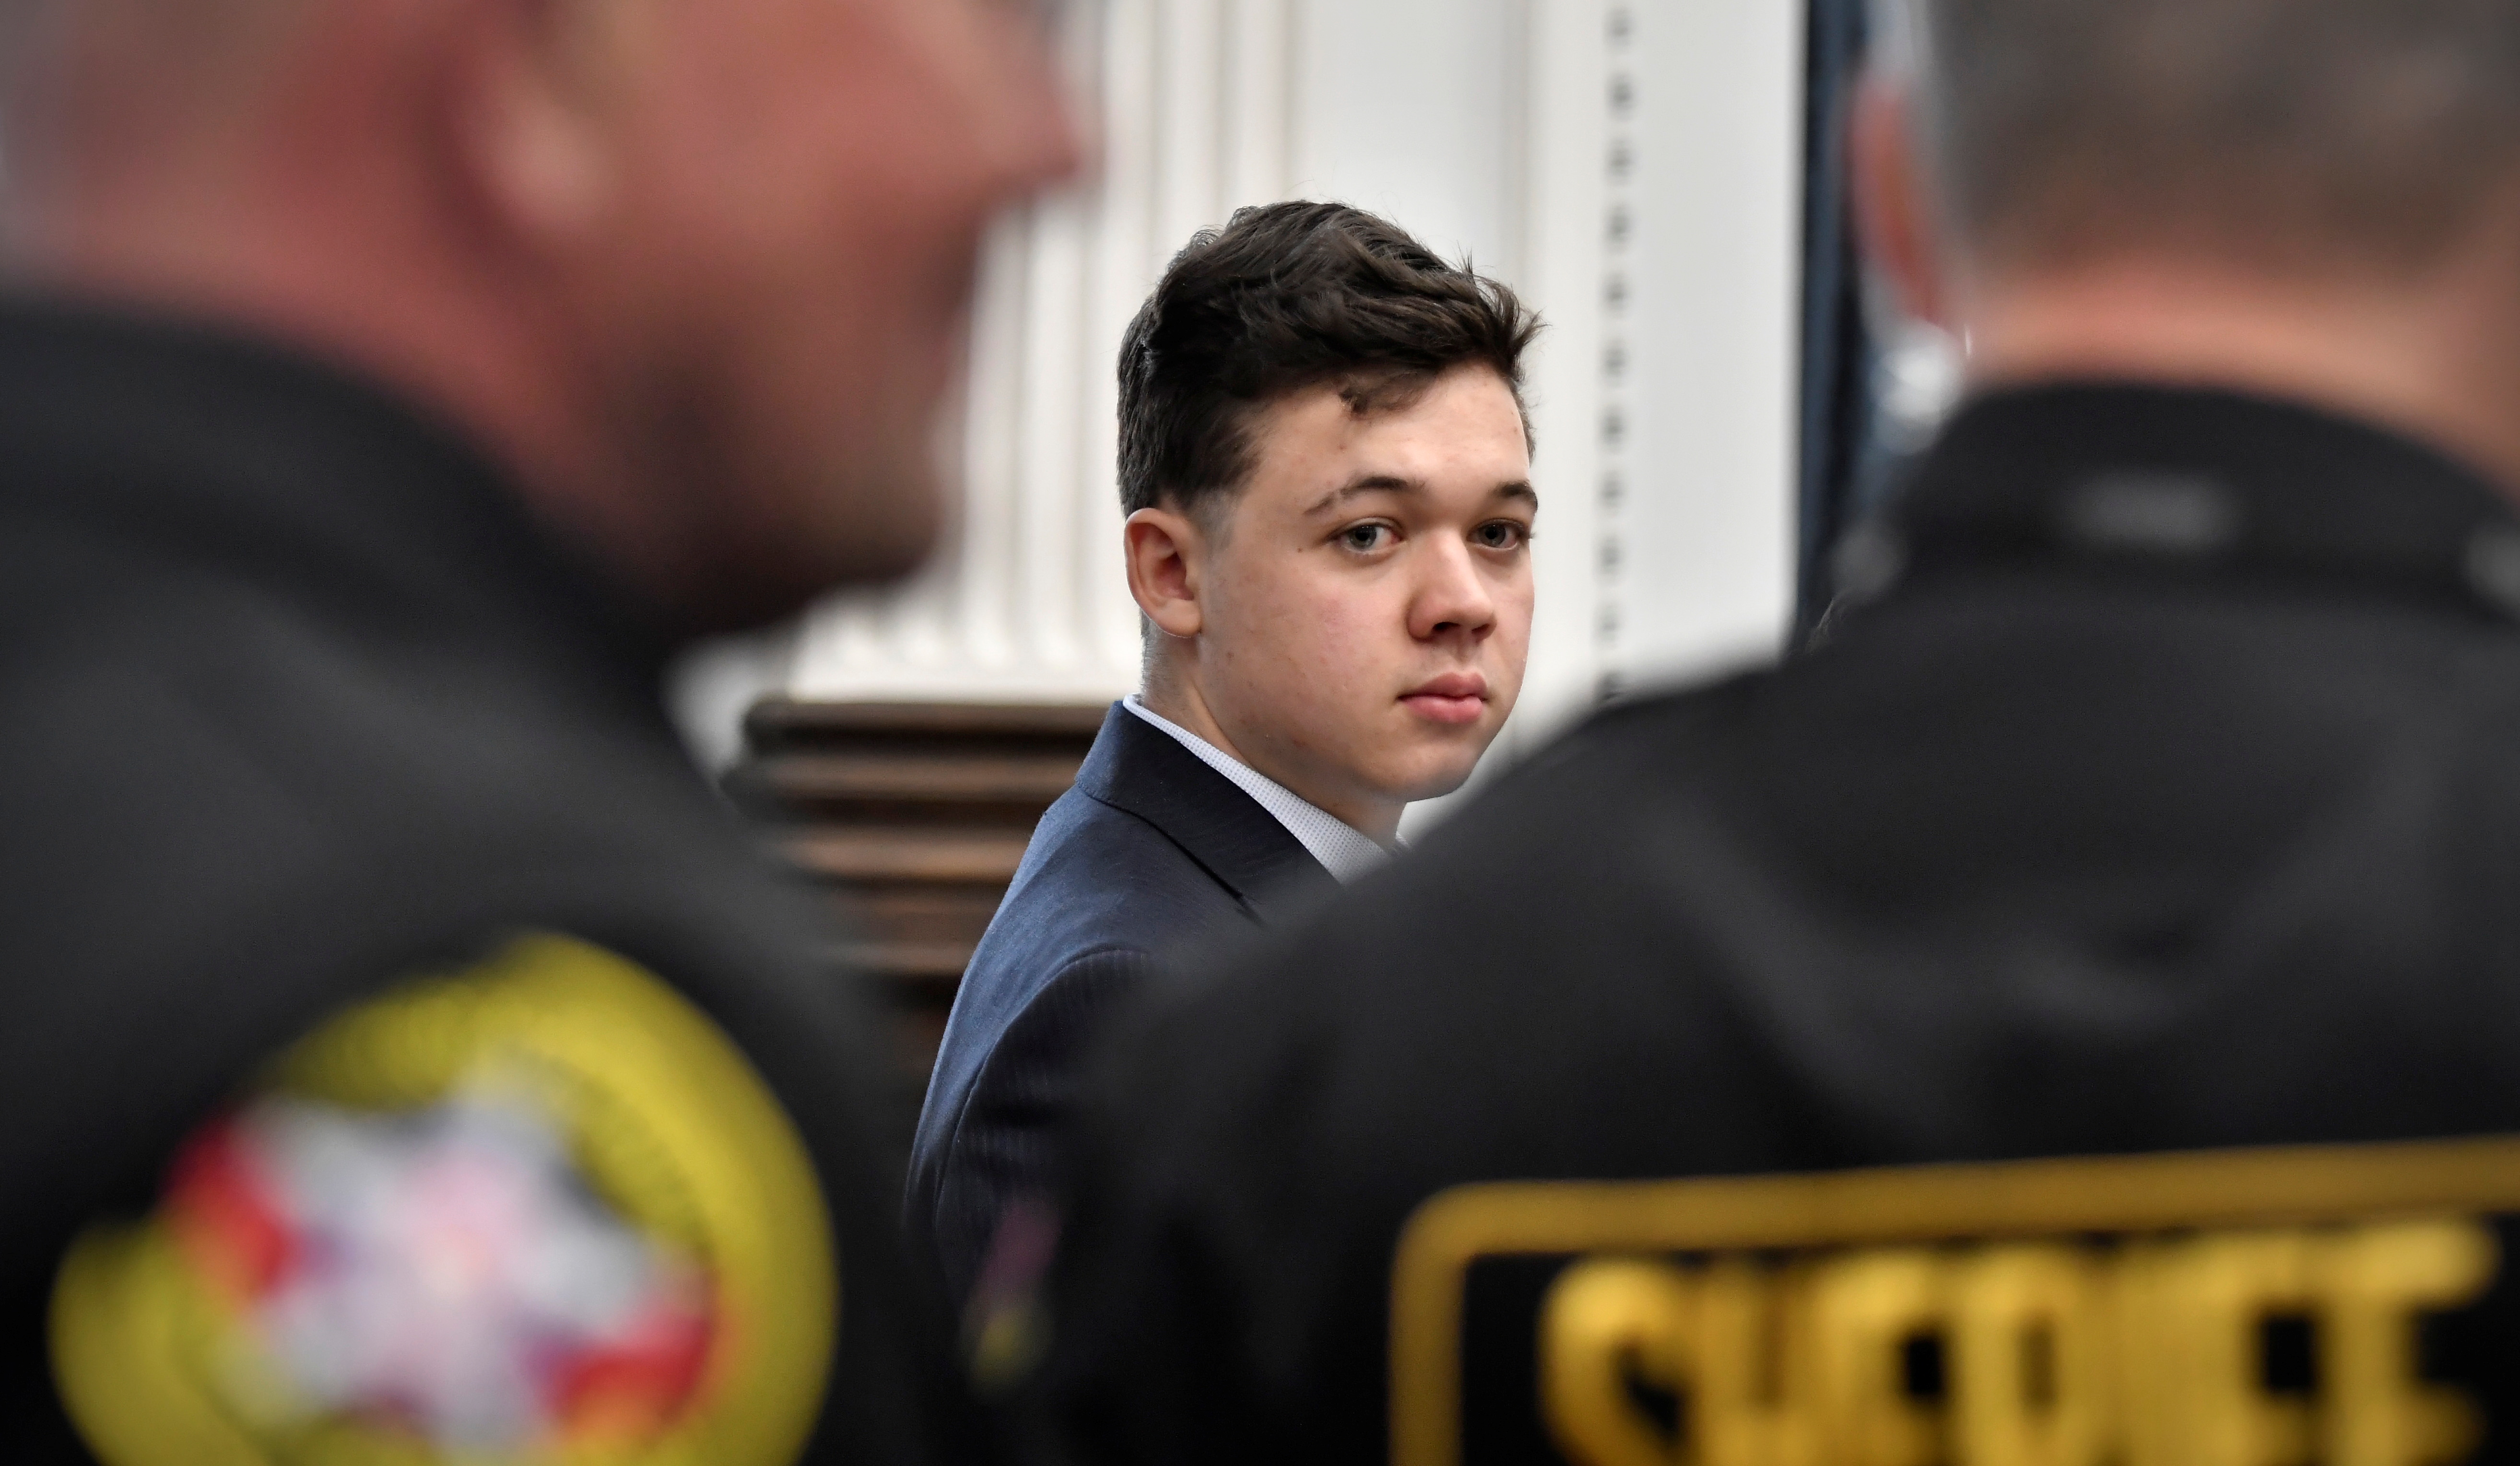 Kyle Rittenhouse looks back as Kenosha County Sheriff's deputies enter the courtroom to escort him out of the room during a break in the trial, at the Kenosha County Courthouse in Kenosha, Wisconsin, U.S., November 5, 2021. Sean Krajacic/Pool via REUTERS/File Photo